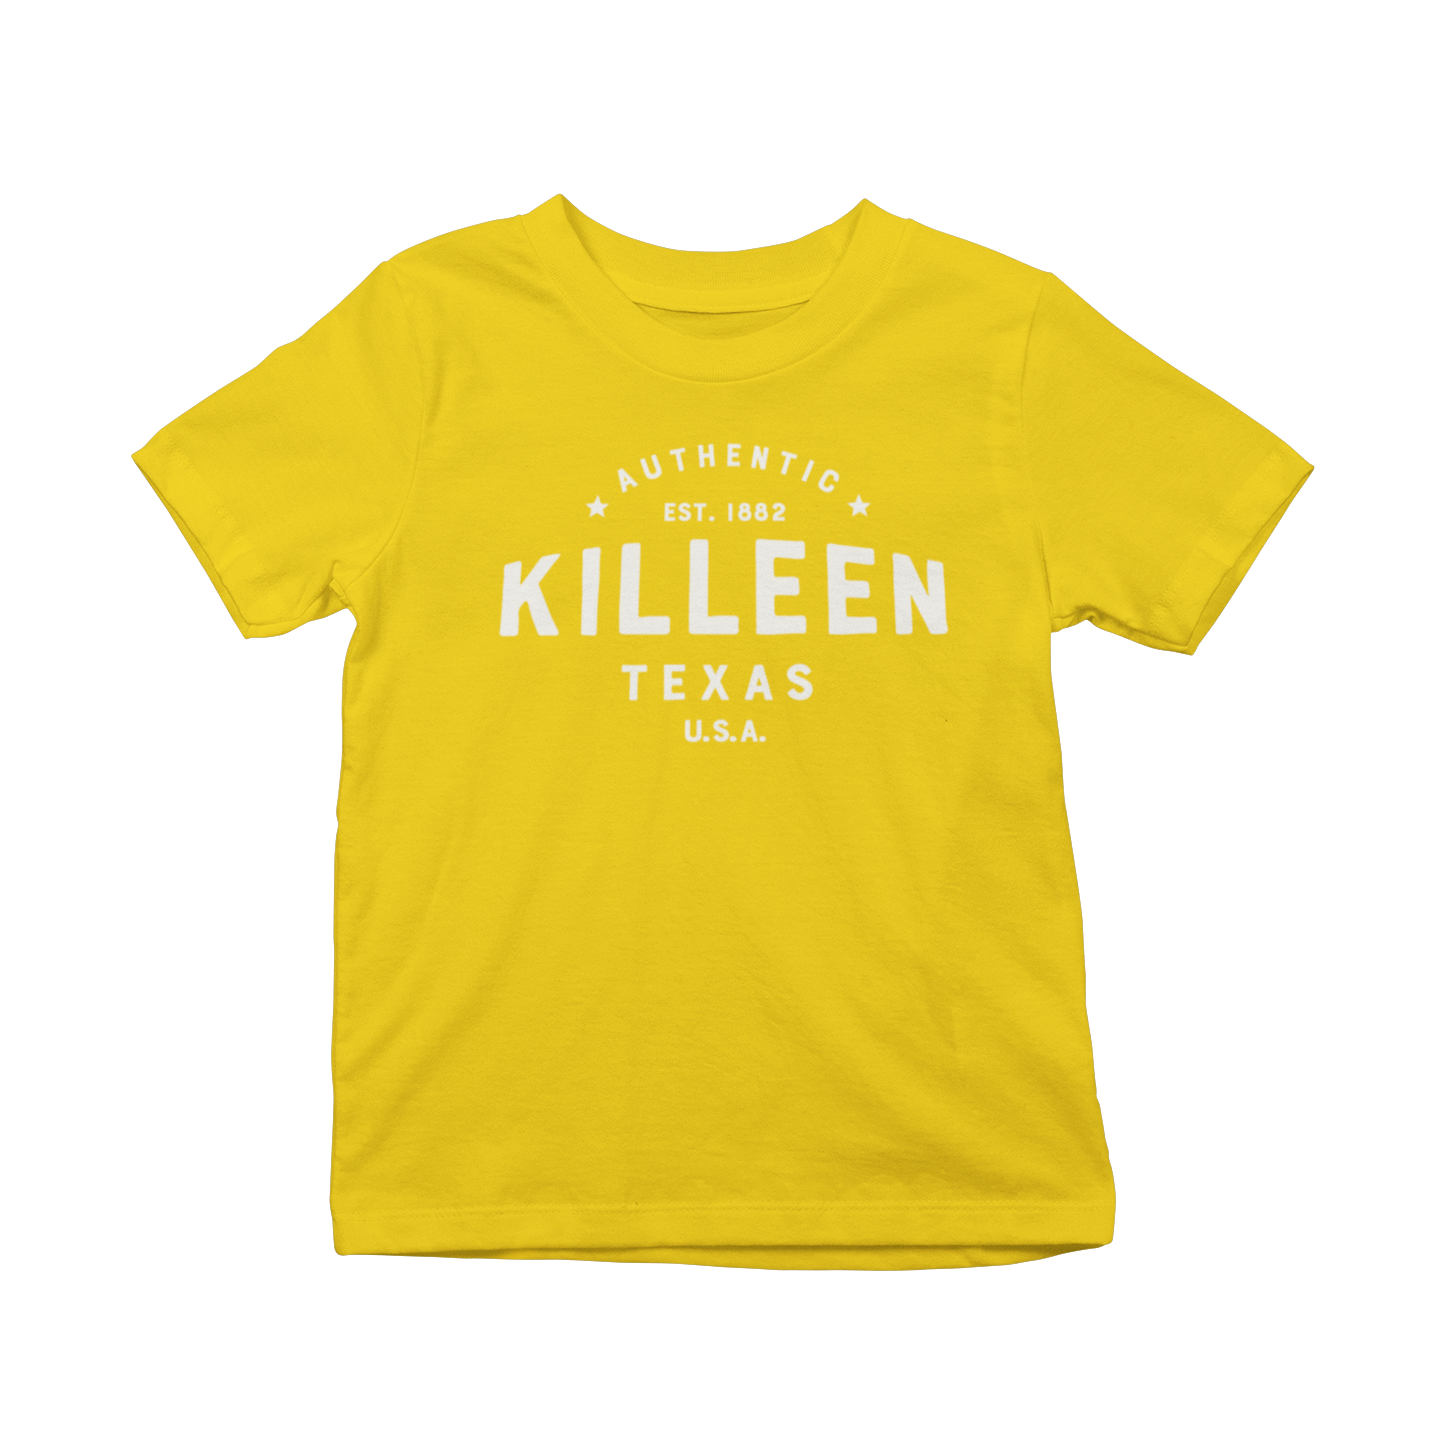 Killeen Texas Toddler T-shirt - Authentic